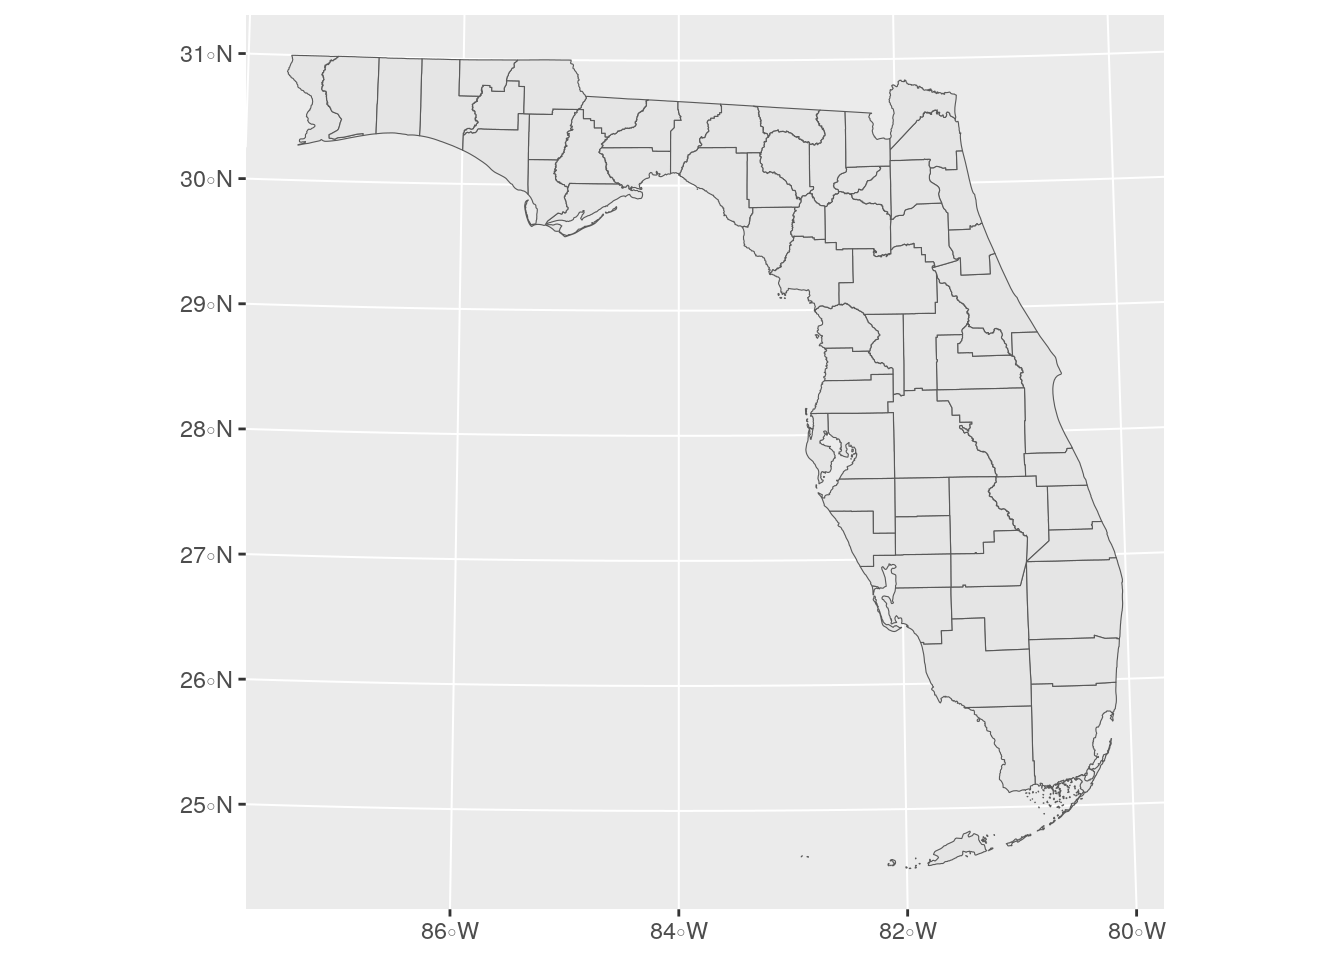 ggplot2 map with CRS specified